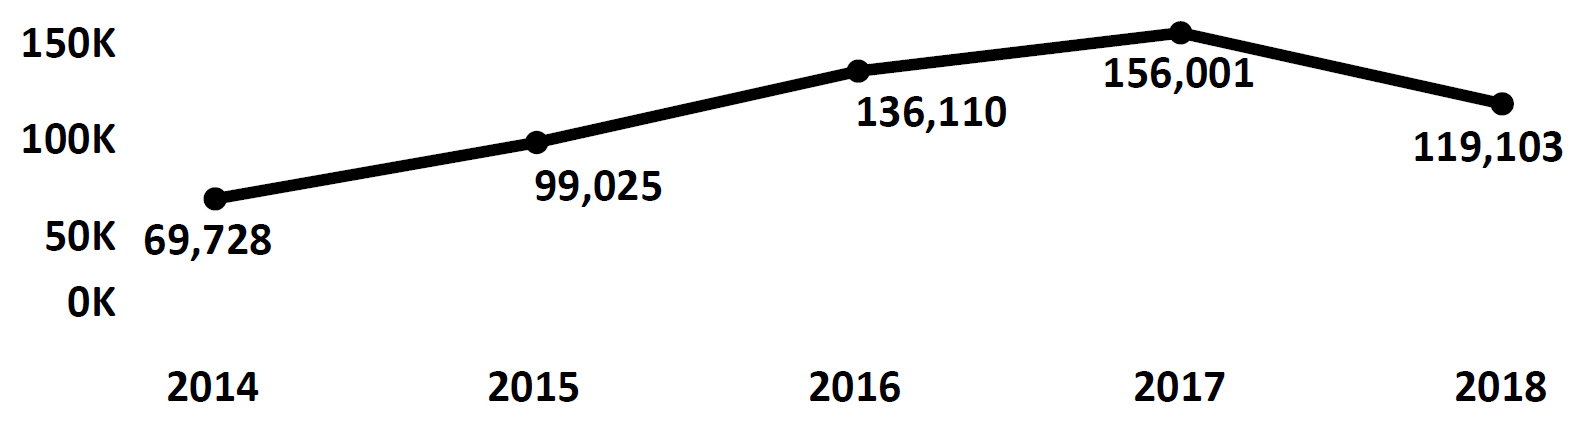 Graph of Do Not Call complaints recorded in Massachusetts from fiscal year 2014 to fiscal year 2018. In 2014 there were 69,728 complaints filed, which increased each year peaking at 156,001 in 2017. In 2018 there were 119,103 complaints filed, fewer than 2017.